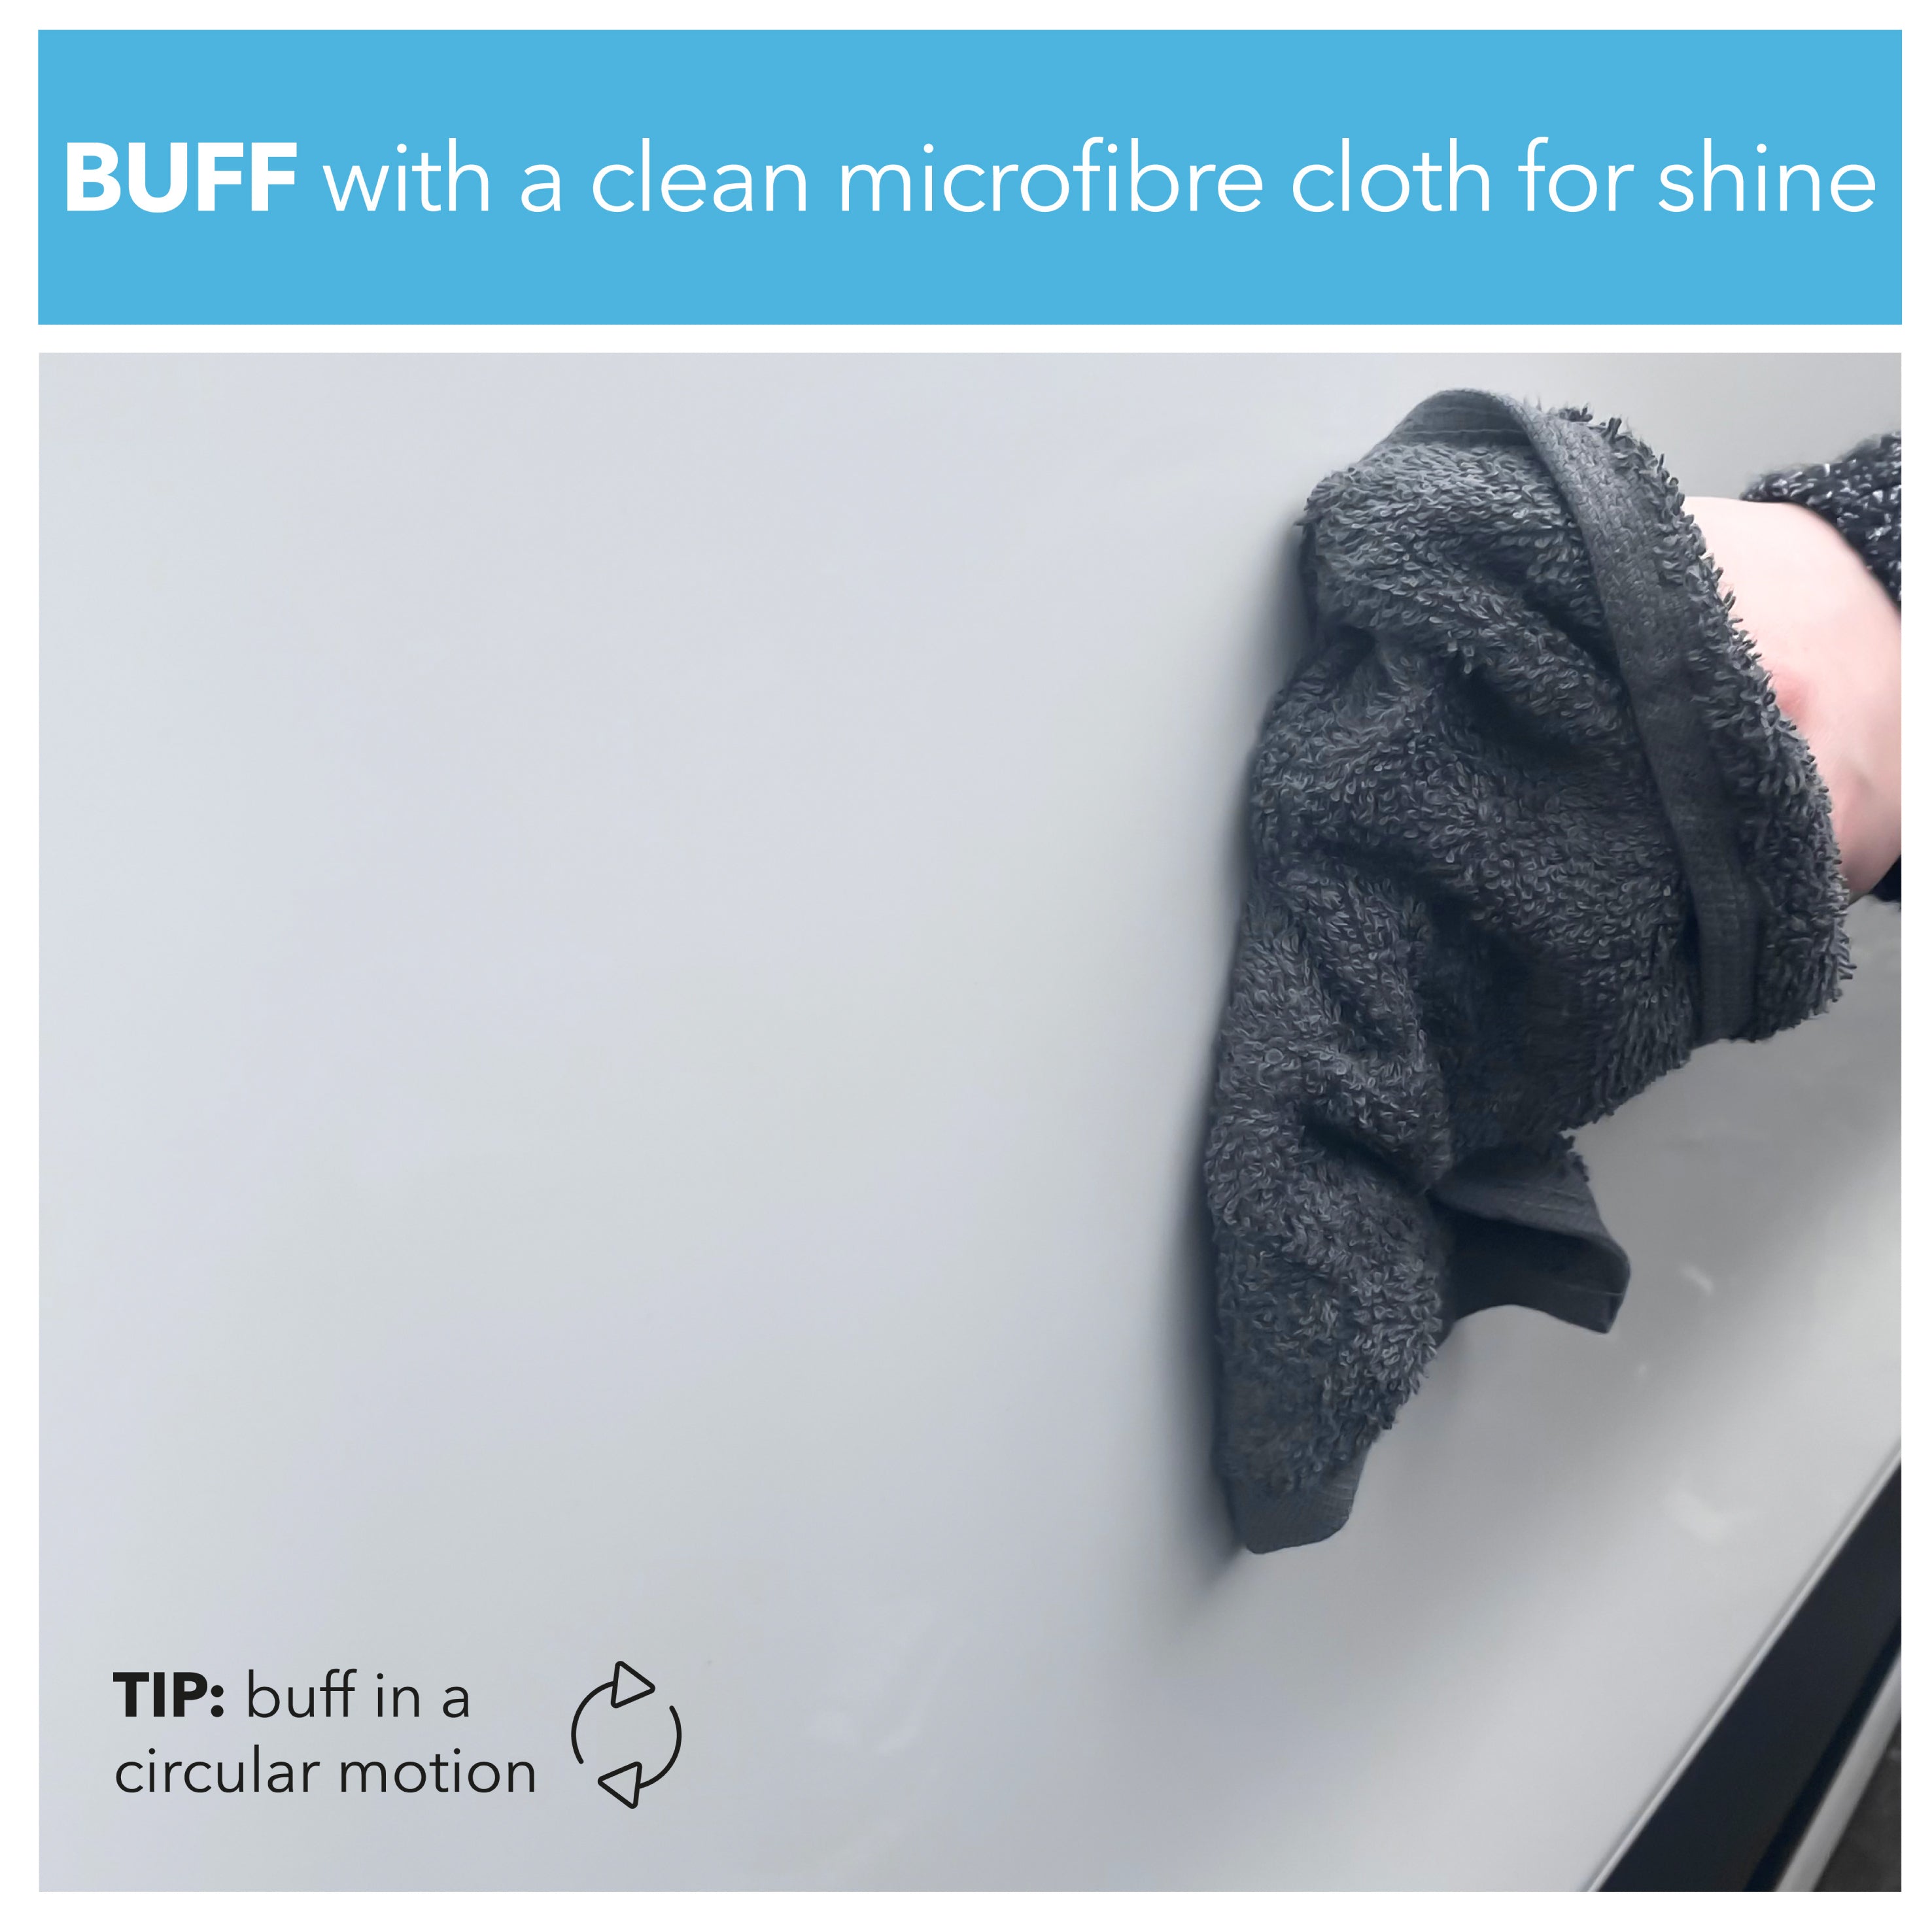 buff with a clean microfibre cloth for shine